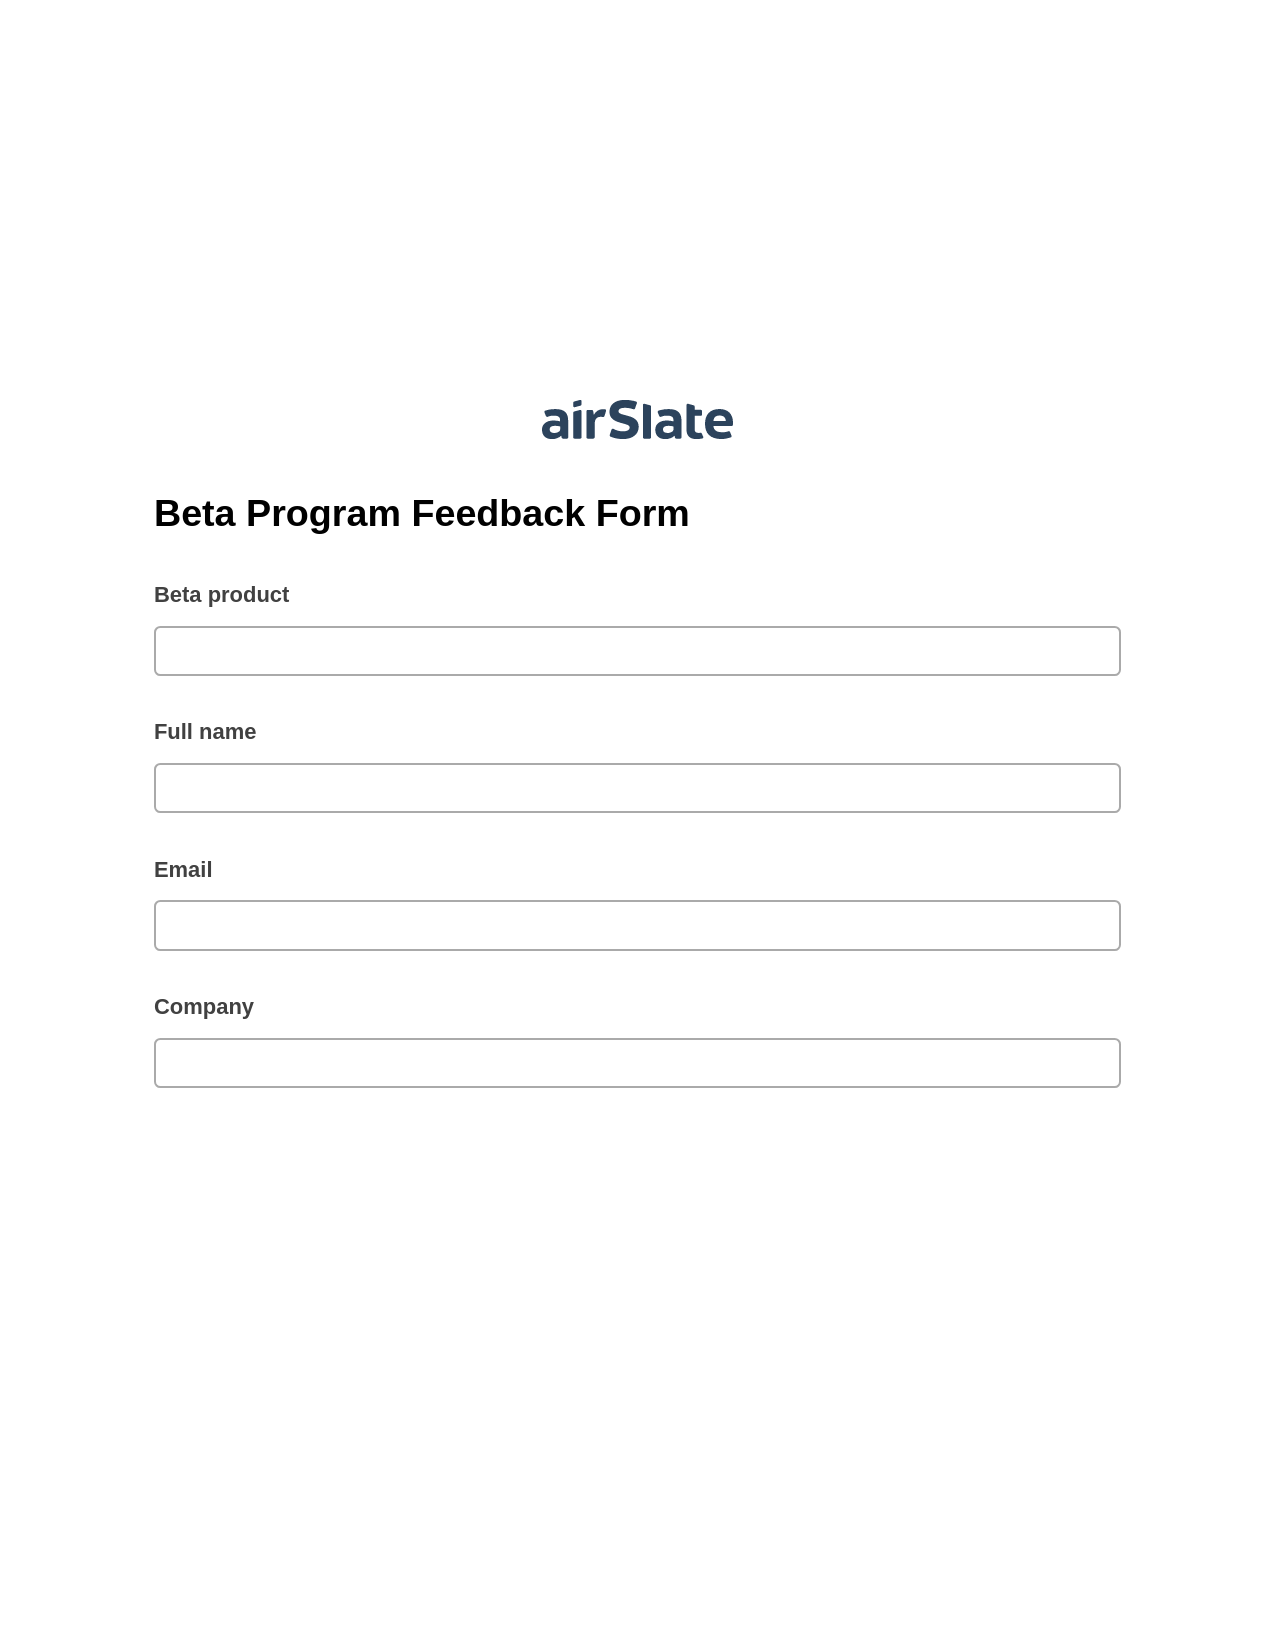 Beta Program Feedback Form Pre-fill from Excel Spreadsheet Bot, Hide Signatures Bot, Export to NetSuite Record Bot